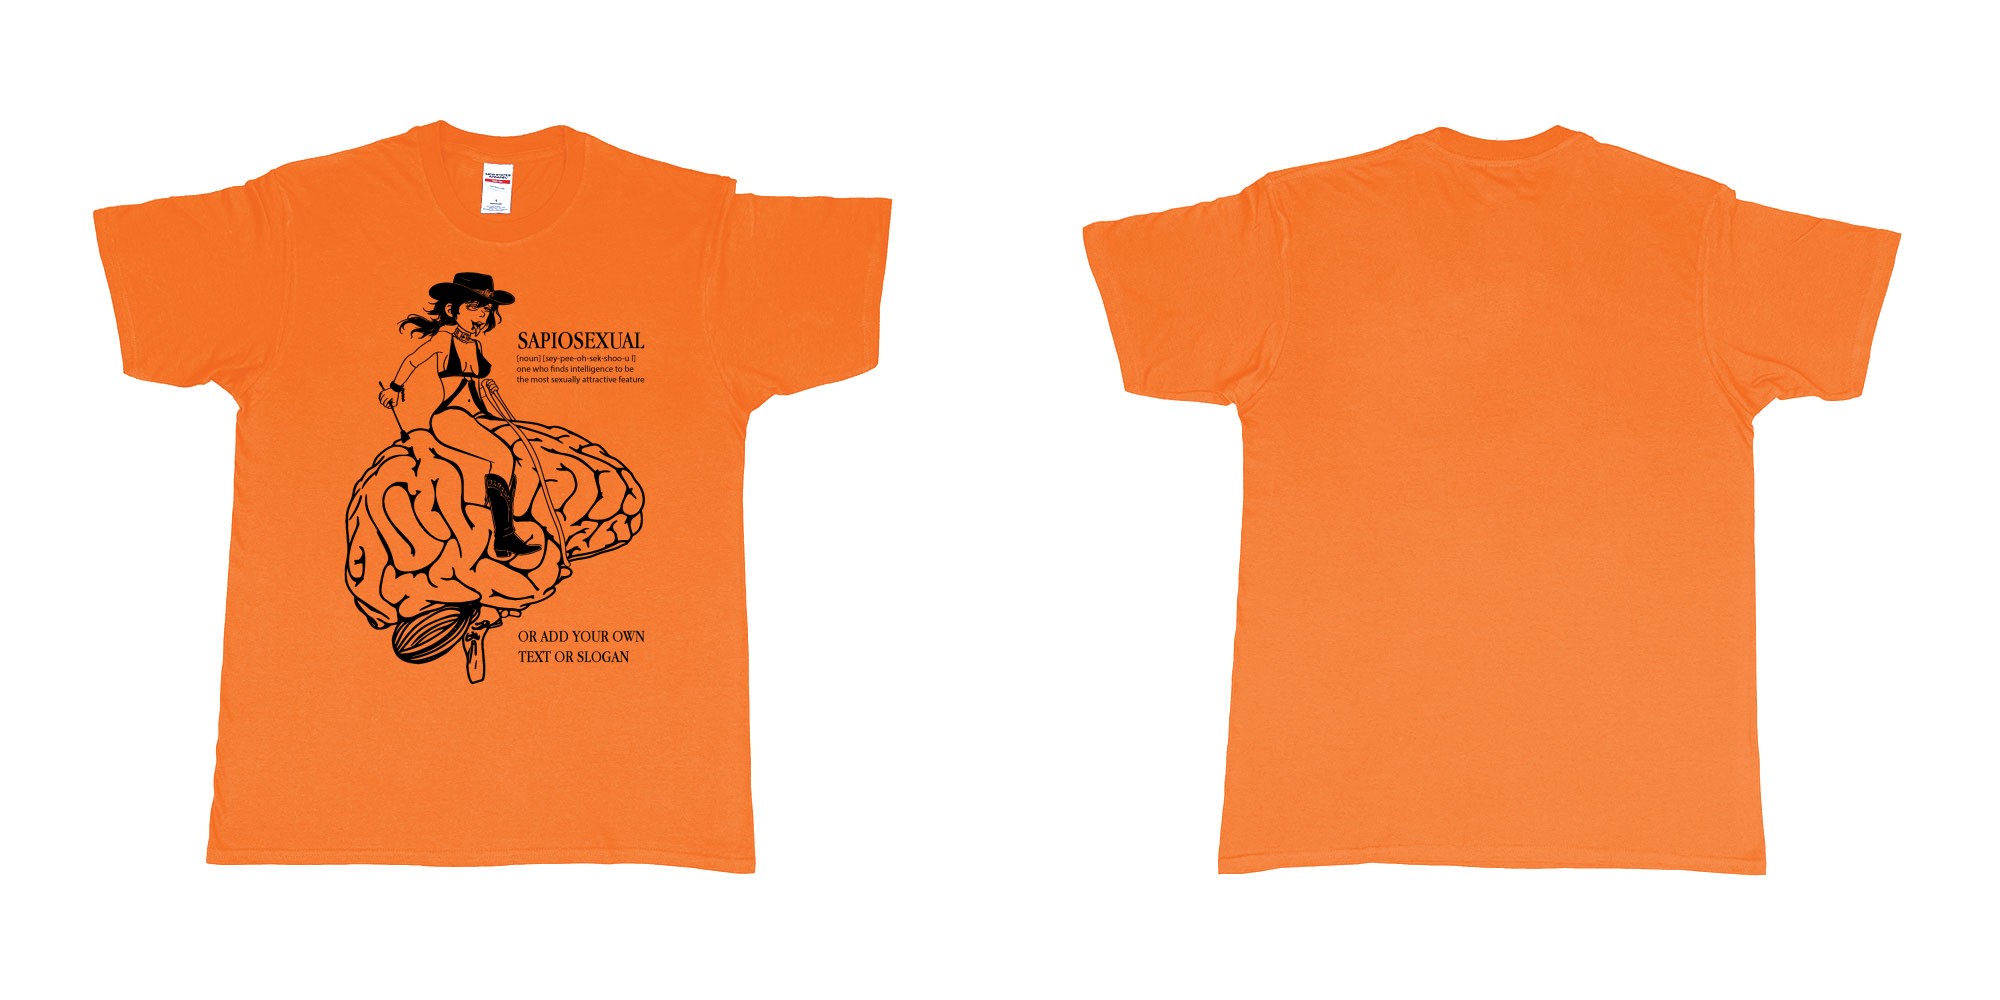 Custom tshirt design sapiosexual cowgirl riding brain in fabric color orange choice your own text made in Bali by The Pirate Way